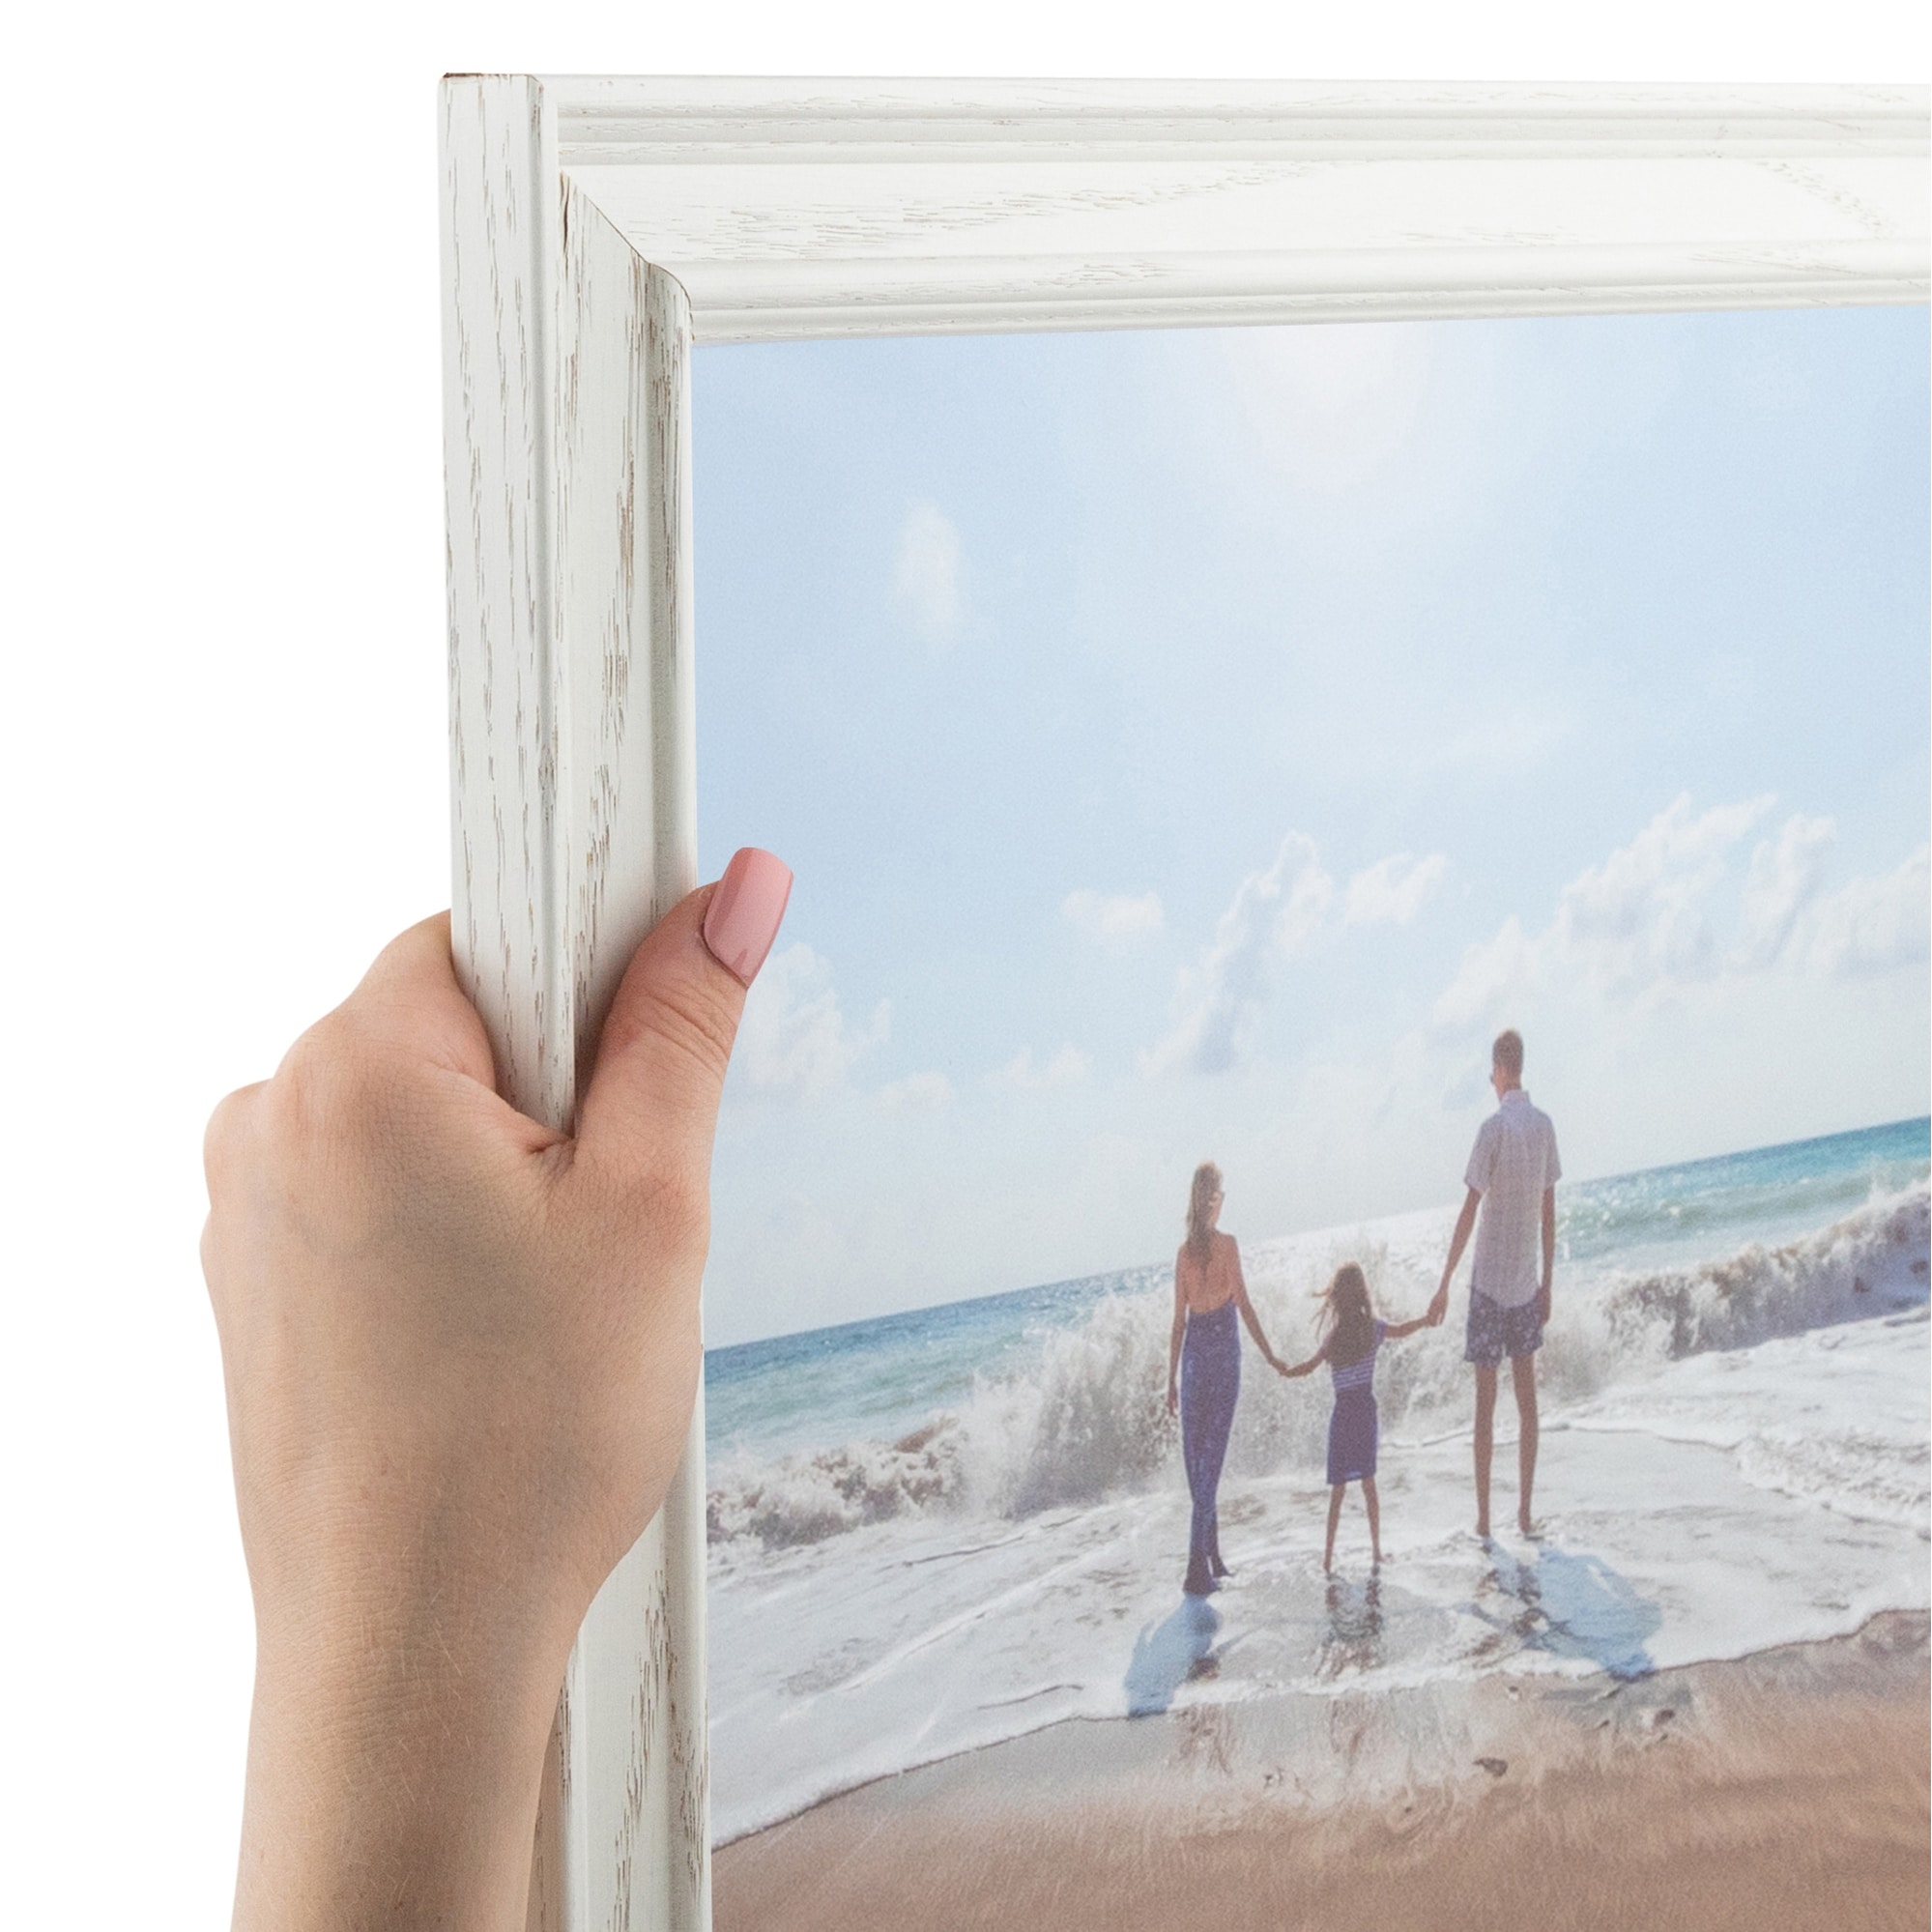 ArtToFrames 16x24 Inch Picture Frame, This 1.50 Inch Custom Wood